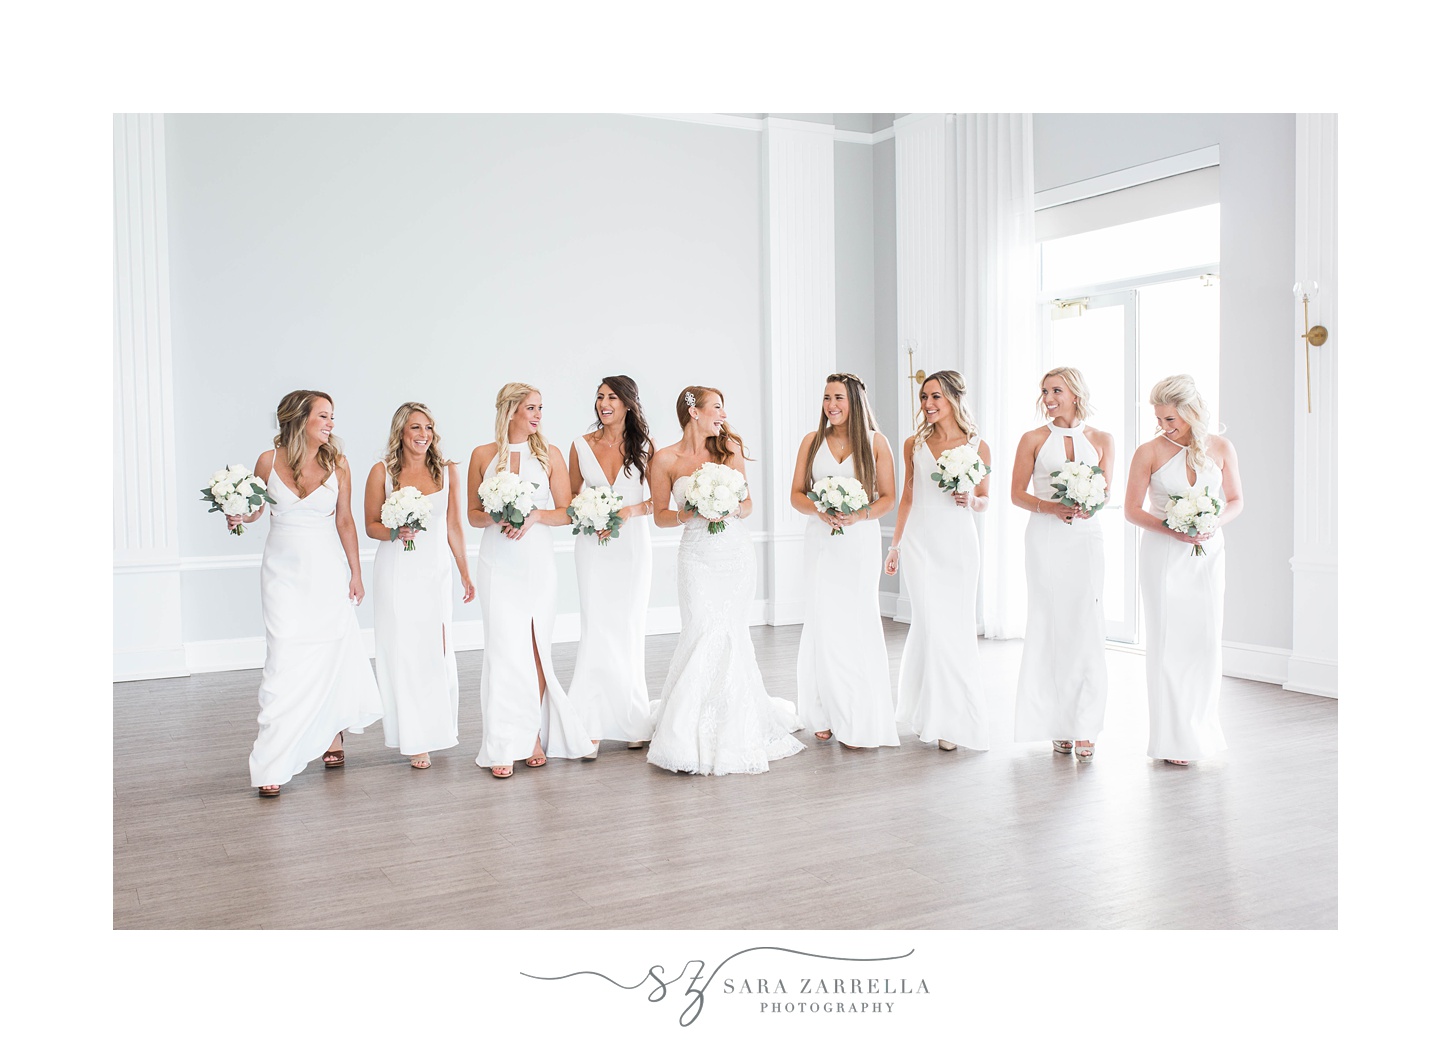 10 things to do with your bridesmaids on your wedding morning